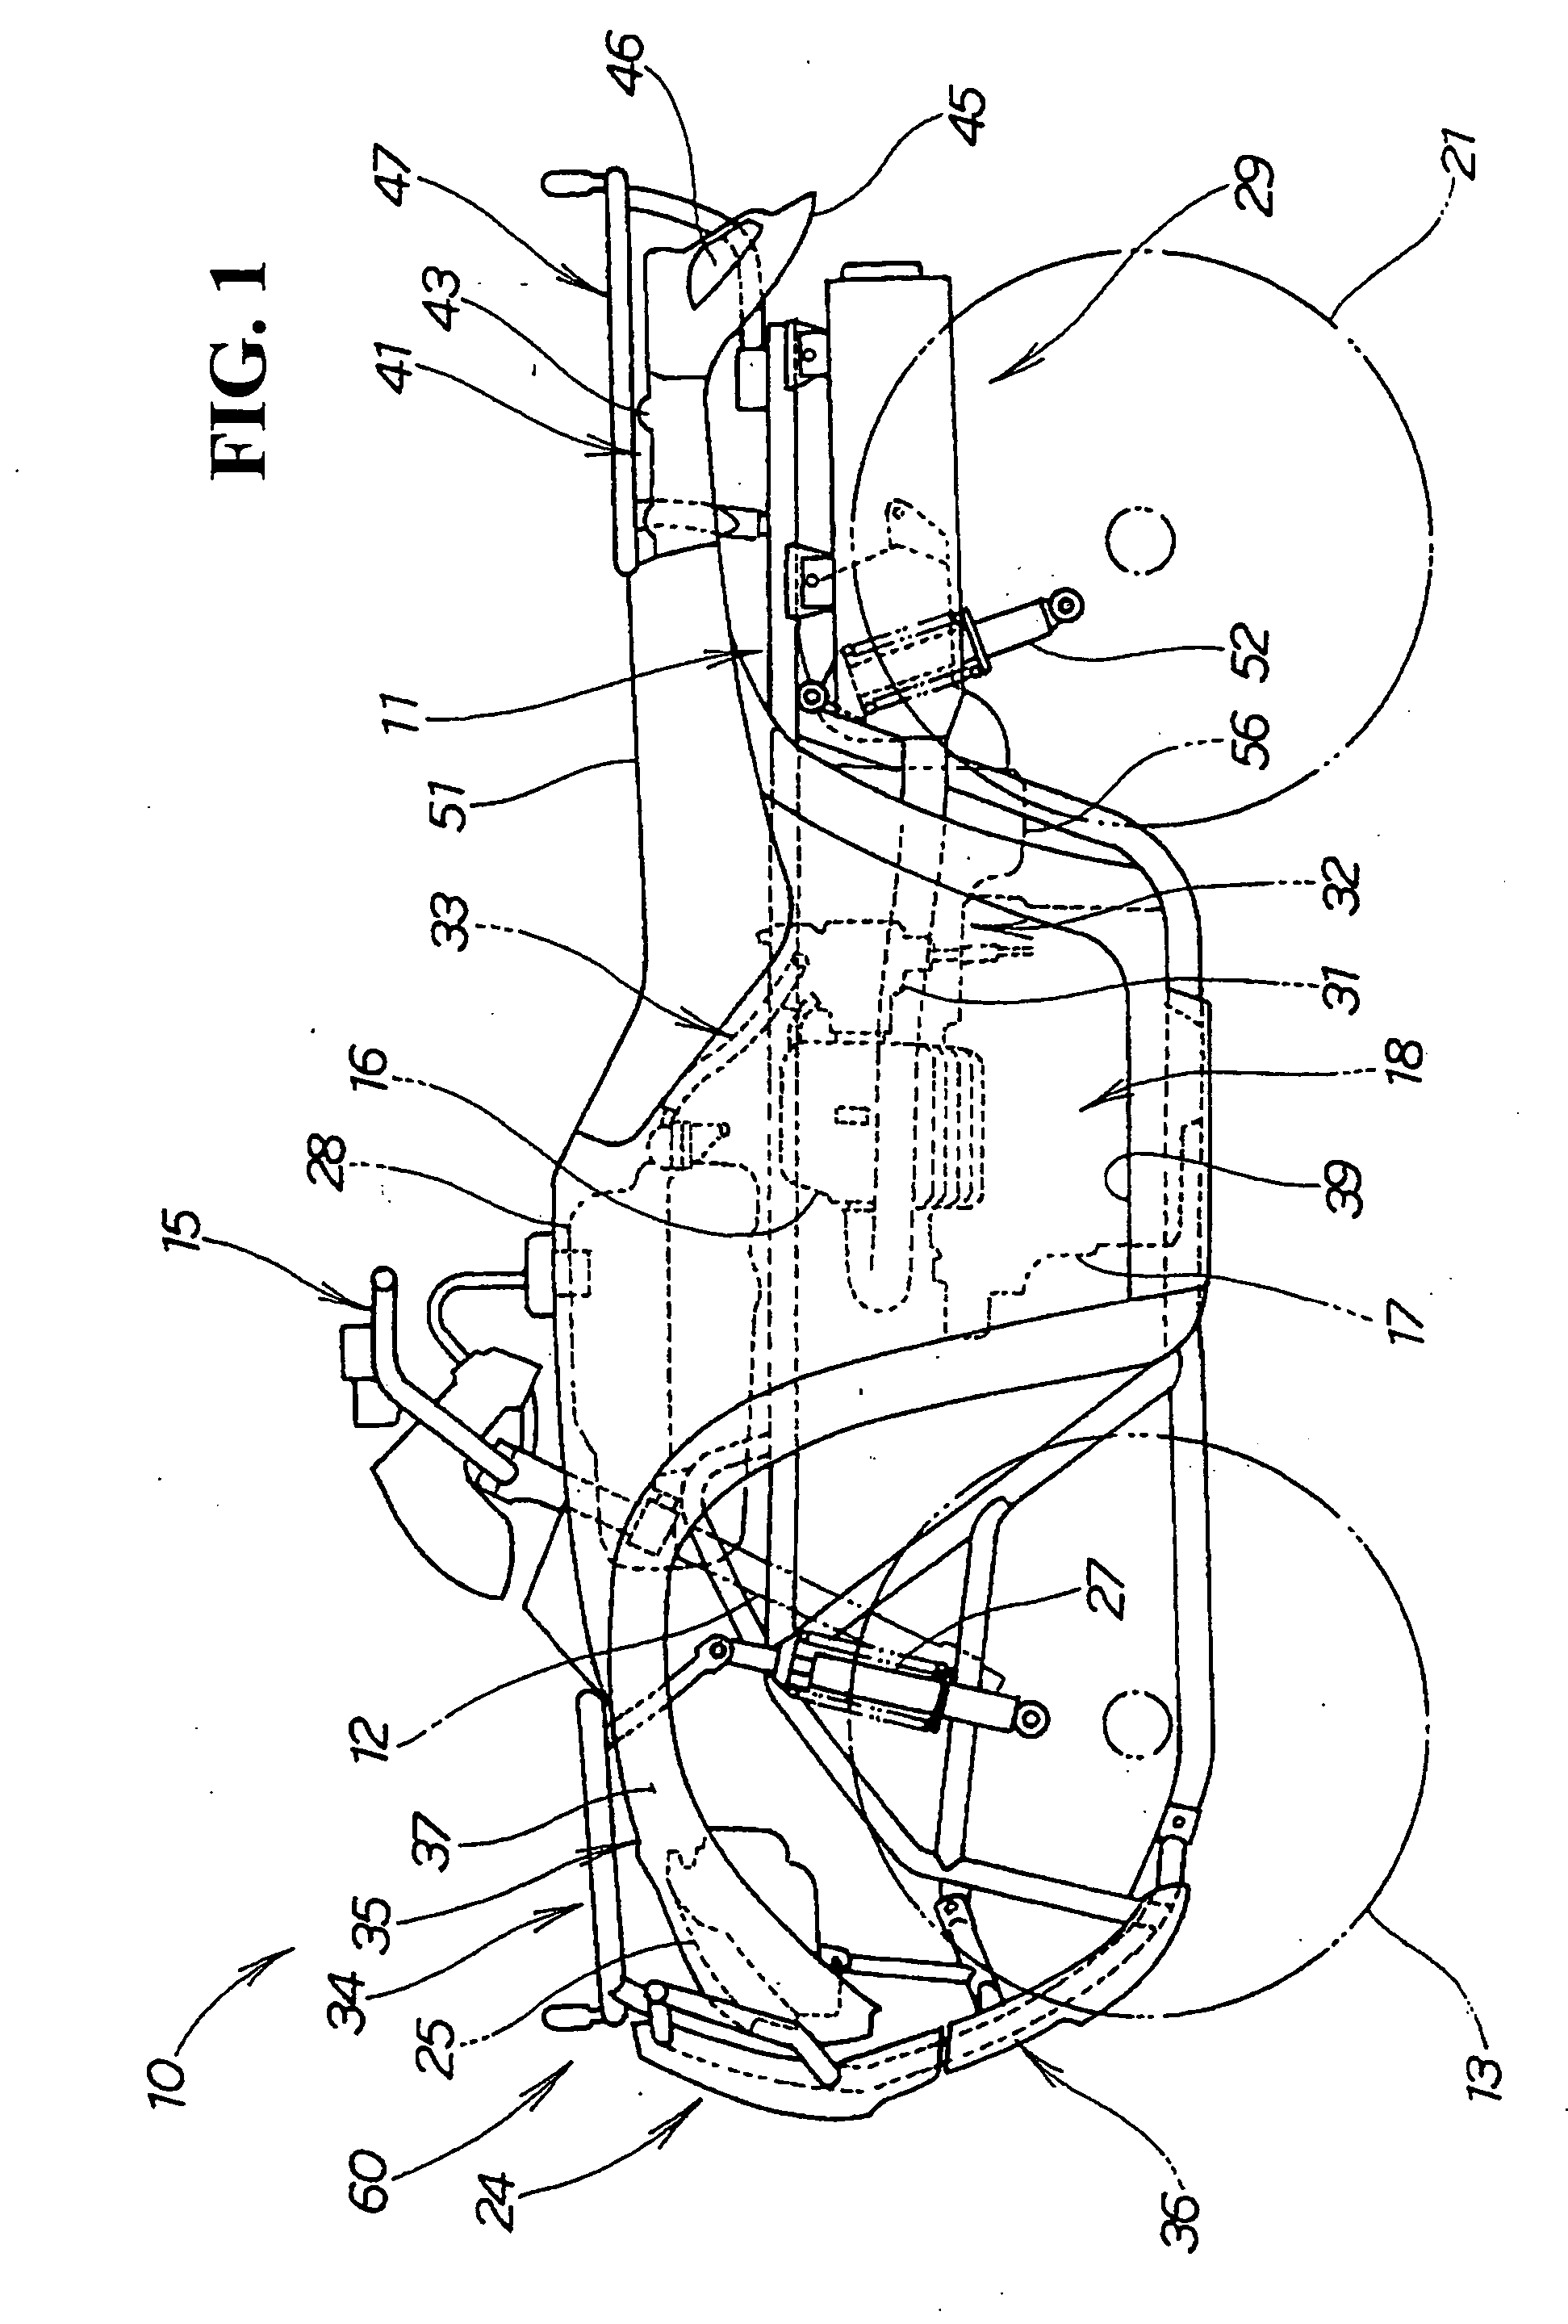 Structure for supporting headlamps for vehicle